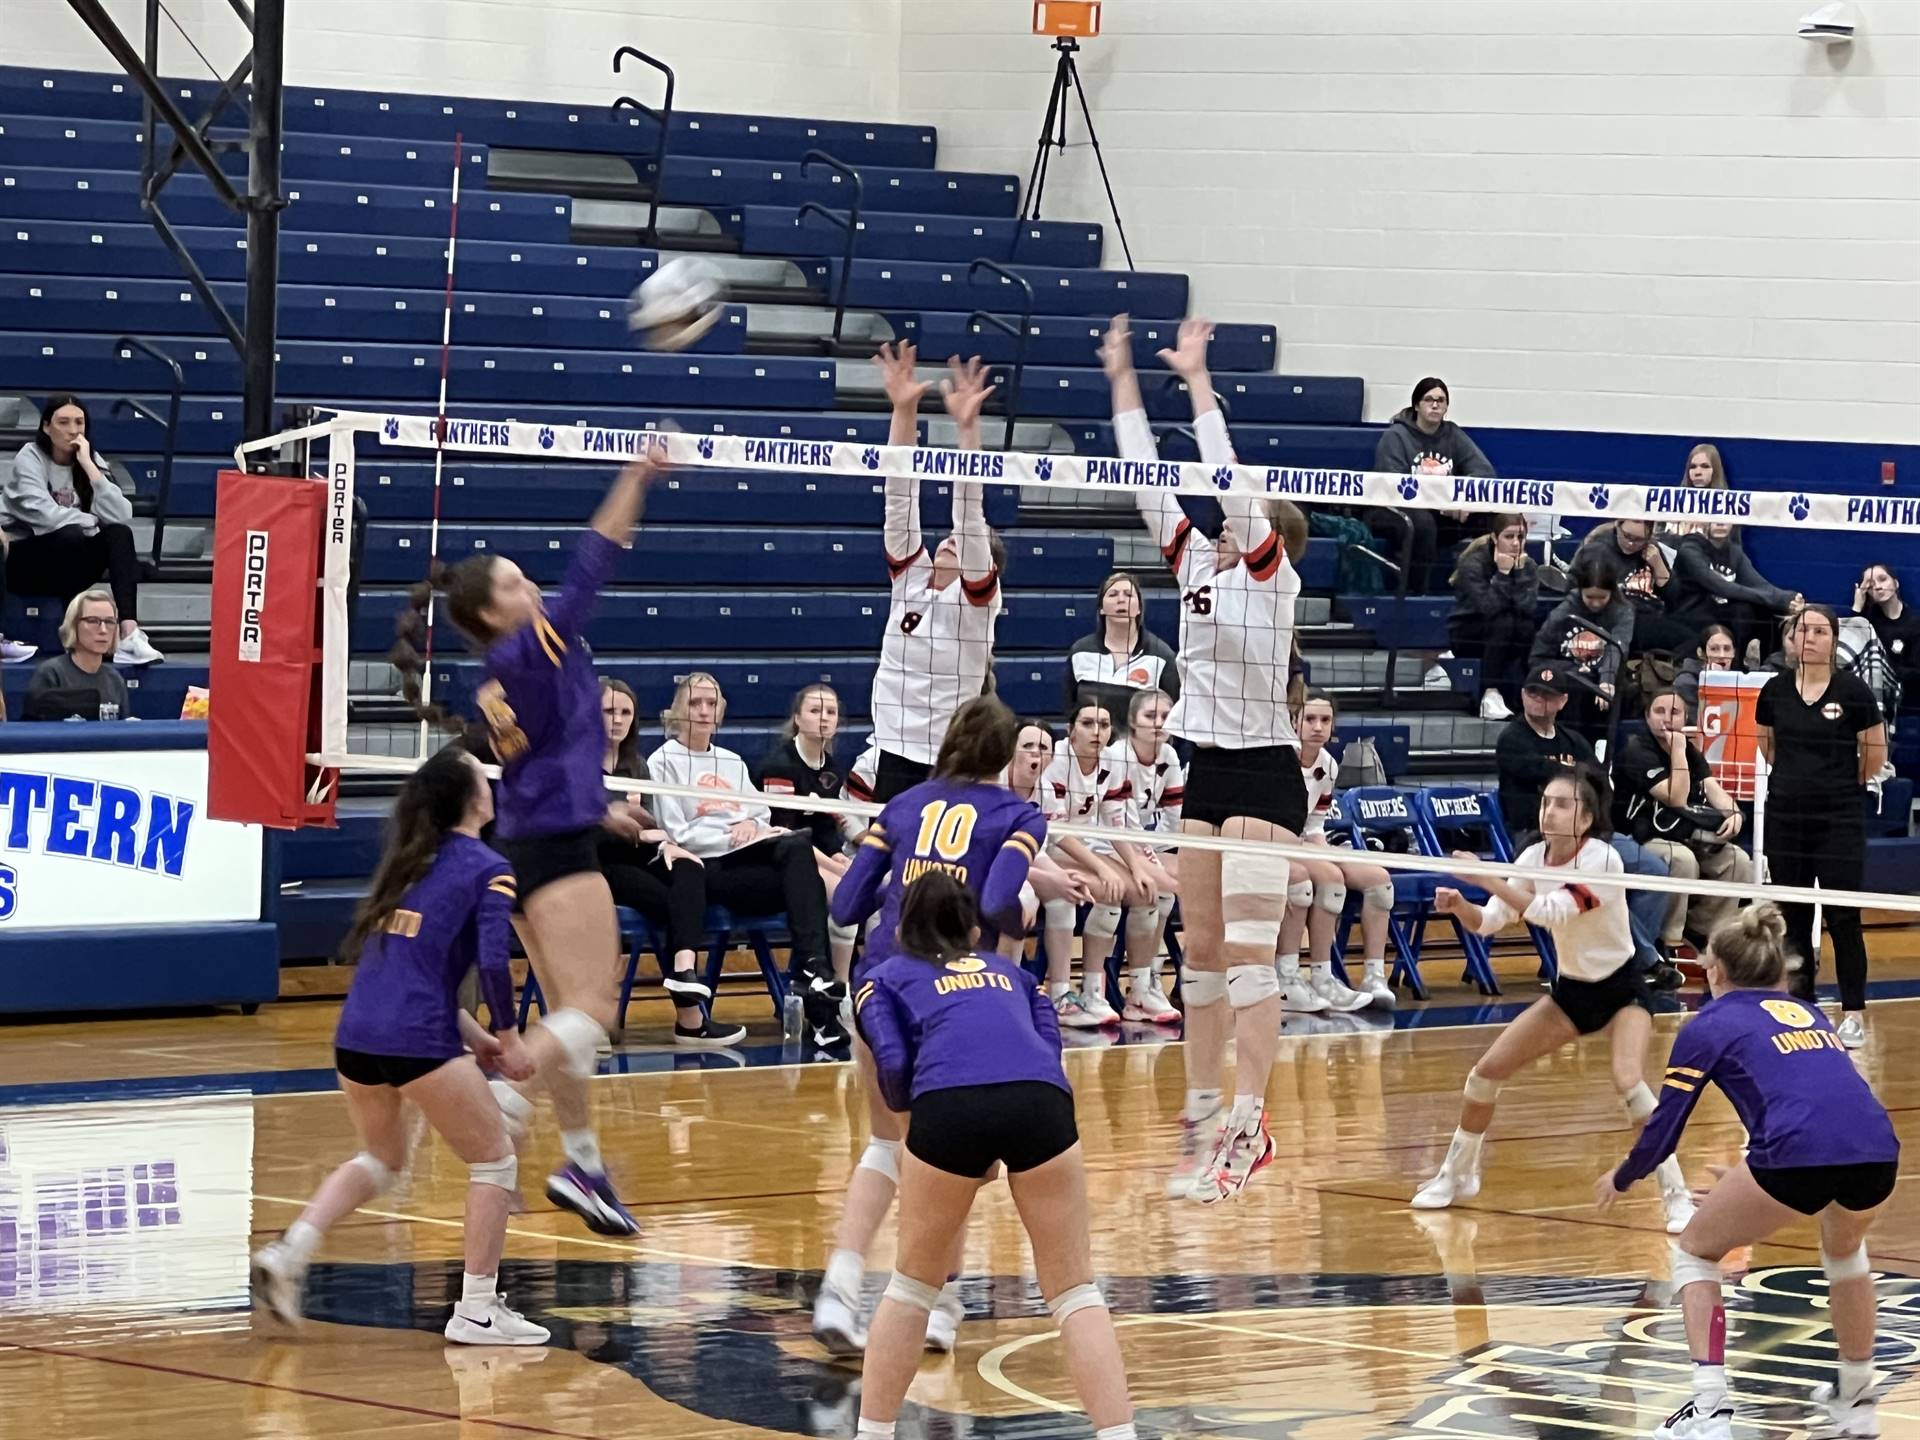 Varsity Volleyball taking on Unioto for District Title